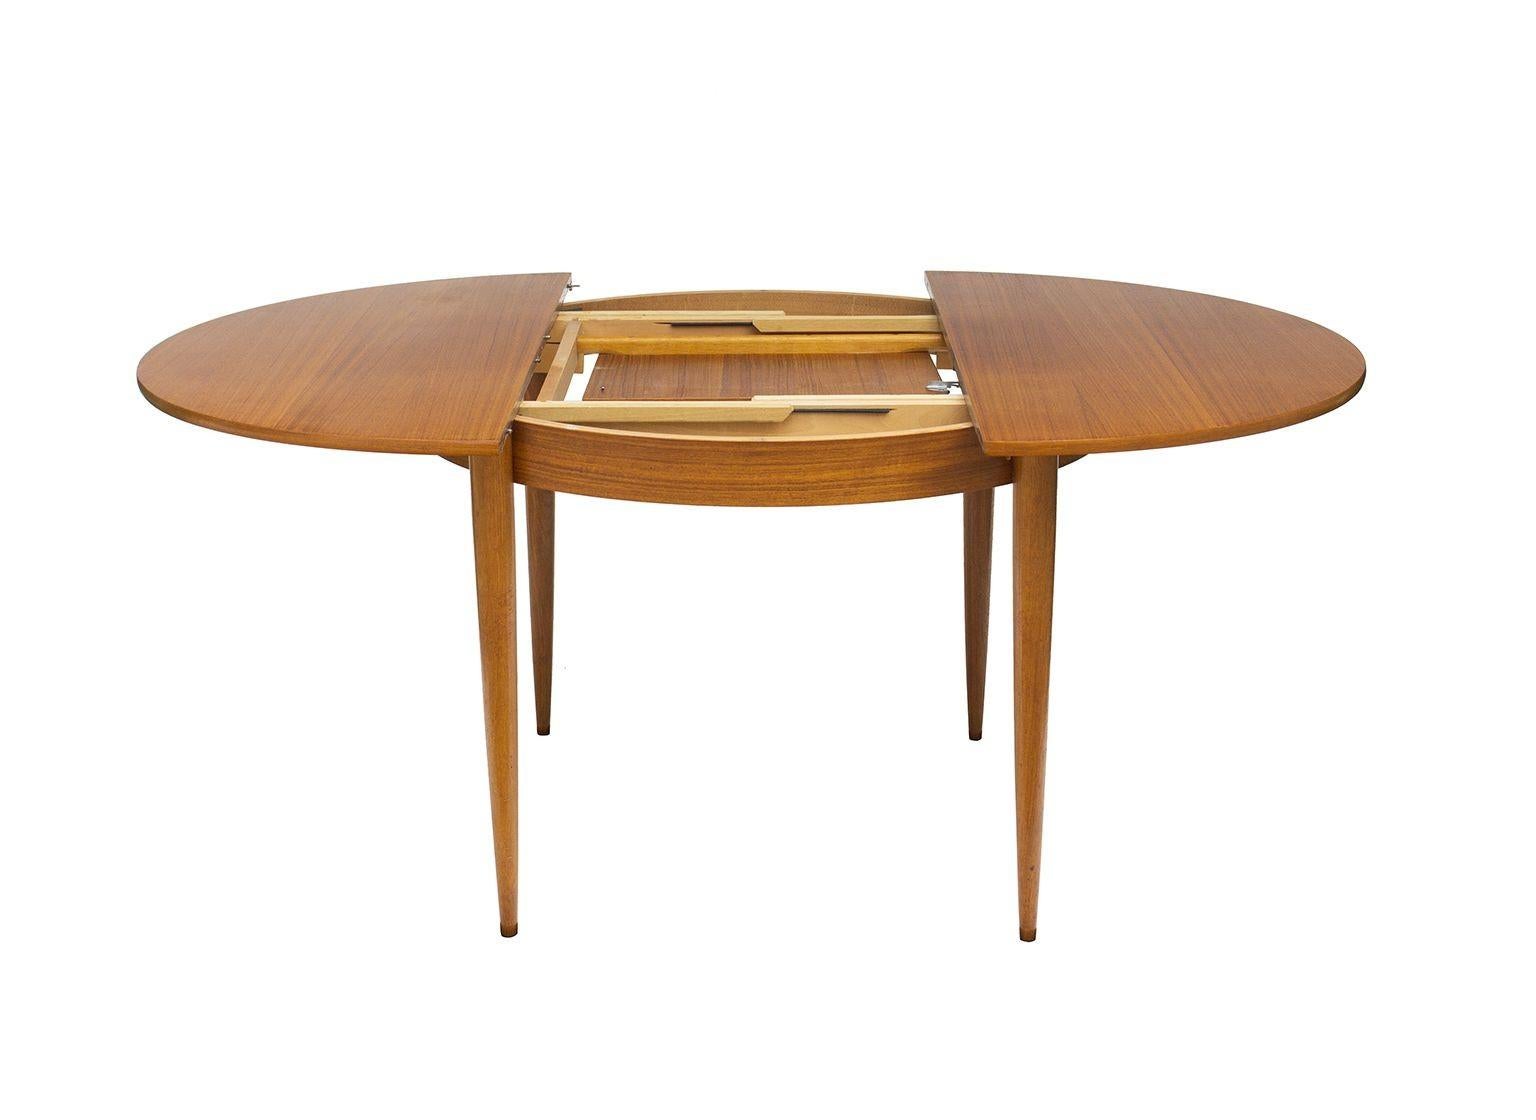 Danish Round Scandinavian Teak Dining Table with Butterfly Leaf